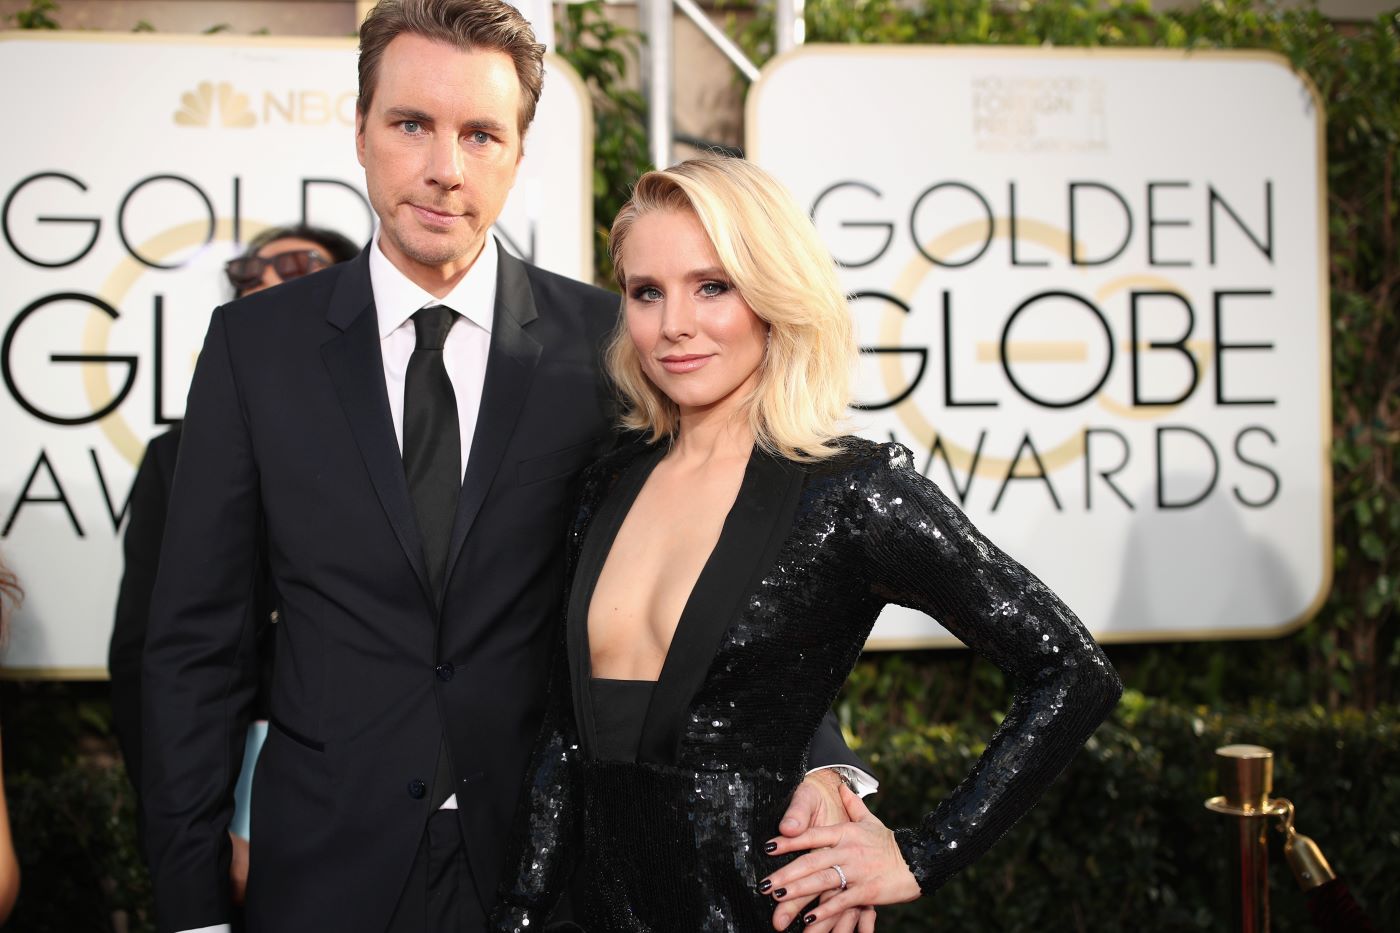 Dax Shepard dressed in a black suit with a white shirt and black tie with Kristen Bell dressed in a solid black dress in front of a Golden Globe Award sign.